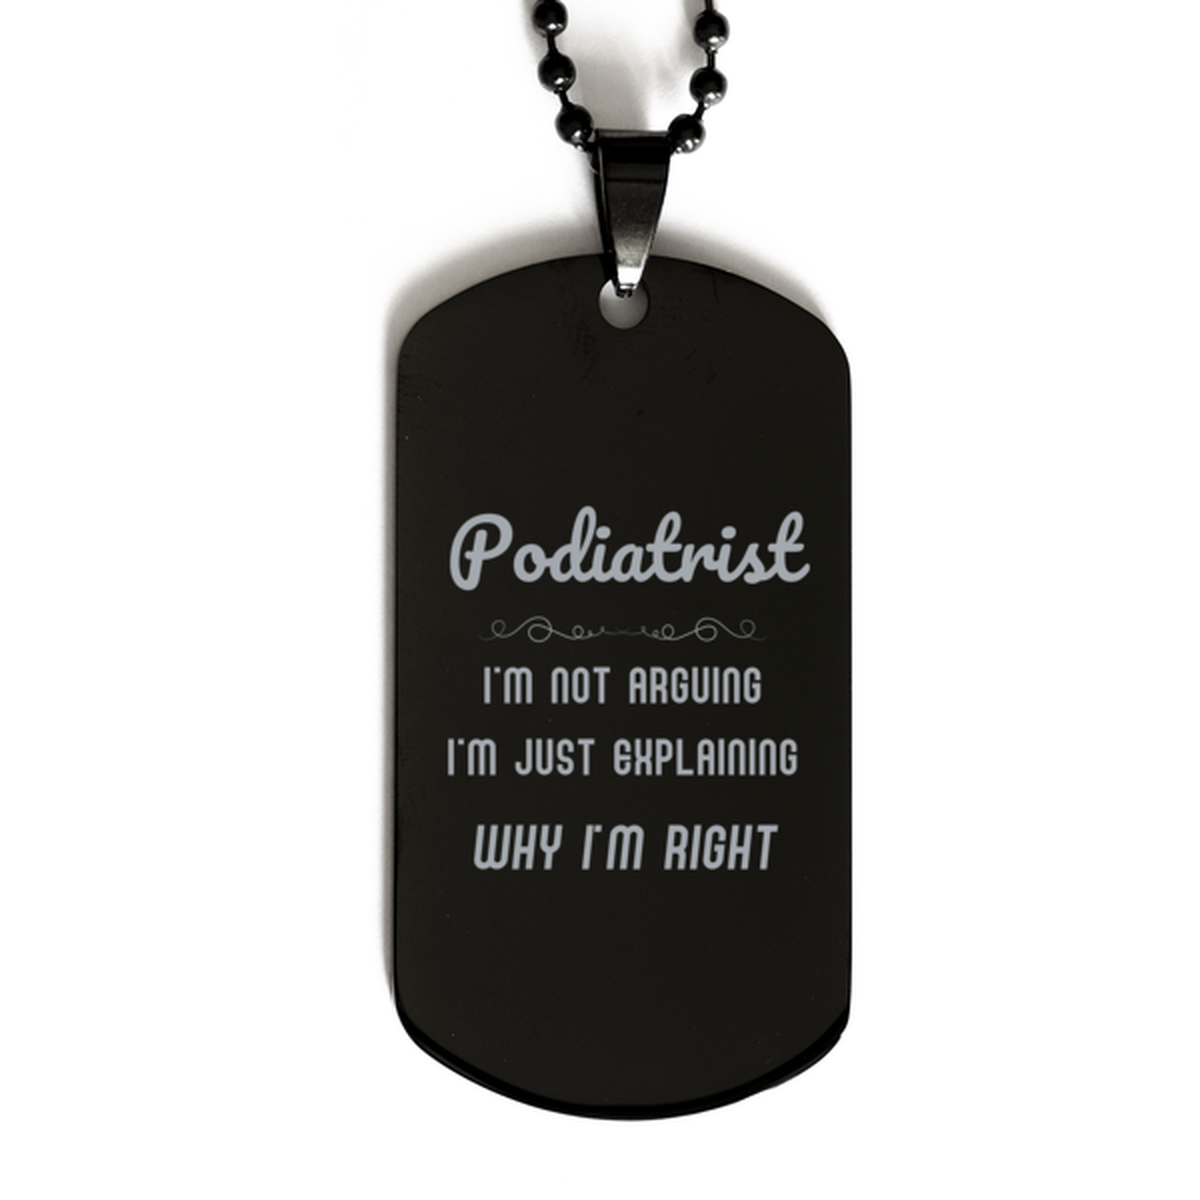 Podiatrist I'm not Arguing. I'm Just Explaining Why I'm RIGHT Black Dog Tag, Funny Saying Quote Podiatrist Gifts For Podiatrist Graduation Birthday Christmas Gifts for Men Women Coworker